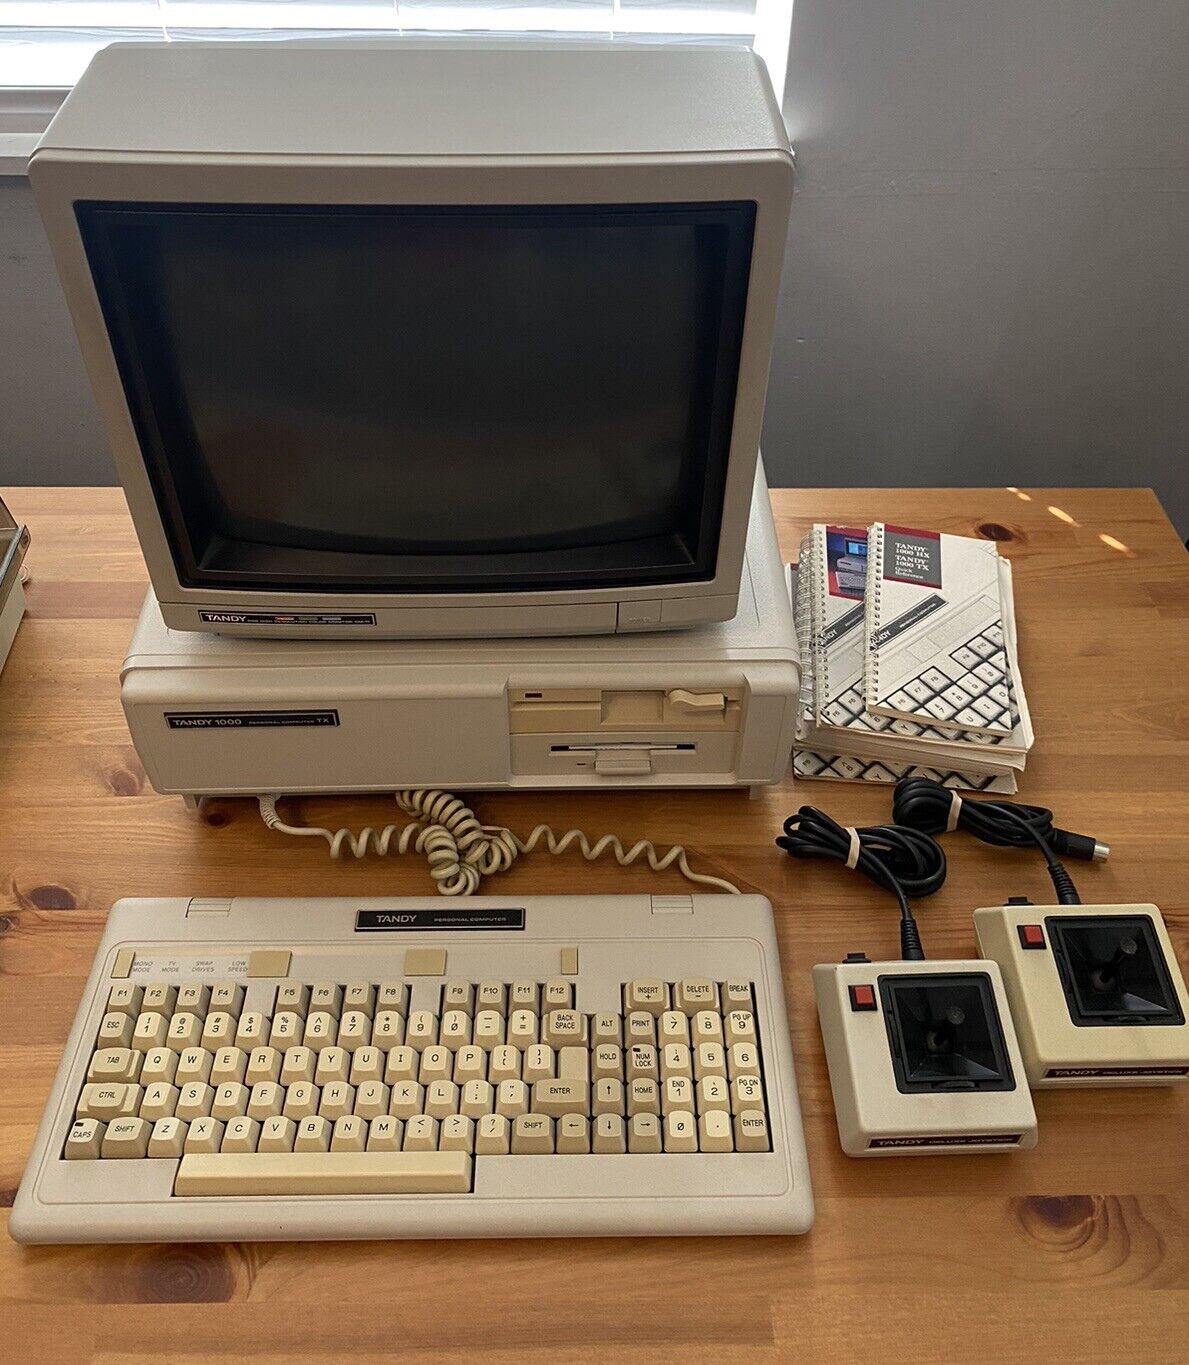 Tandy CM-11 13” Color Monitor, 1000 TX Personal Computer, Keyboard, & Joystick